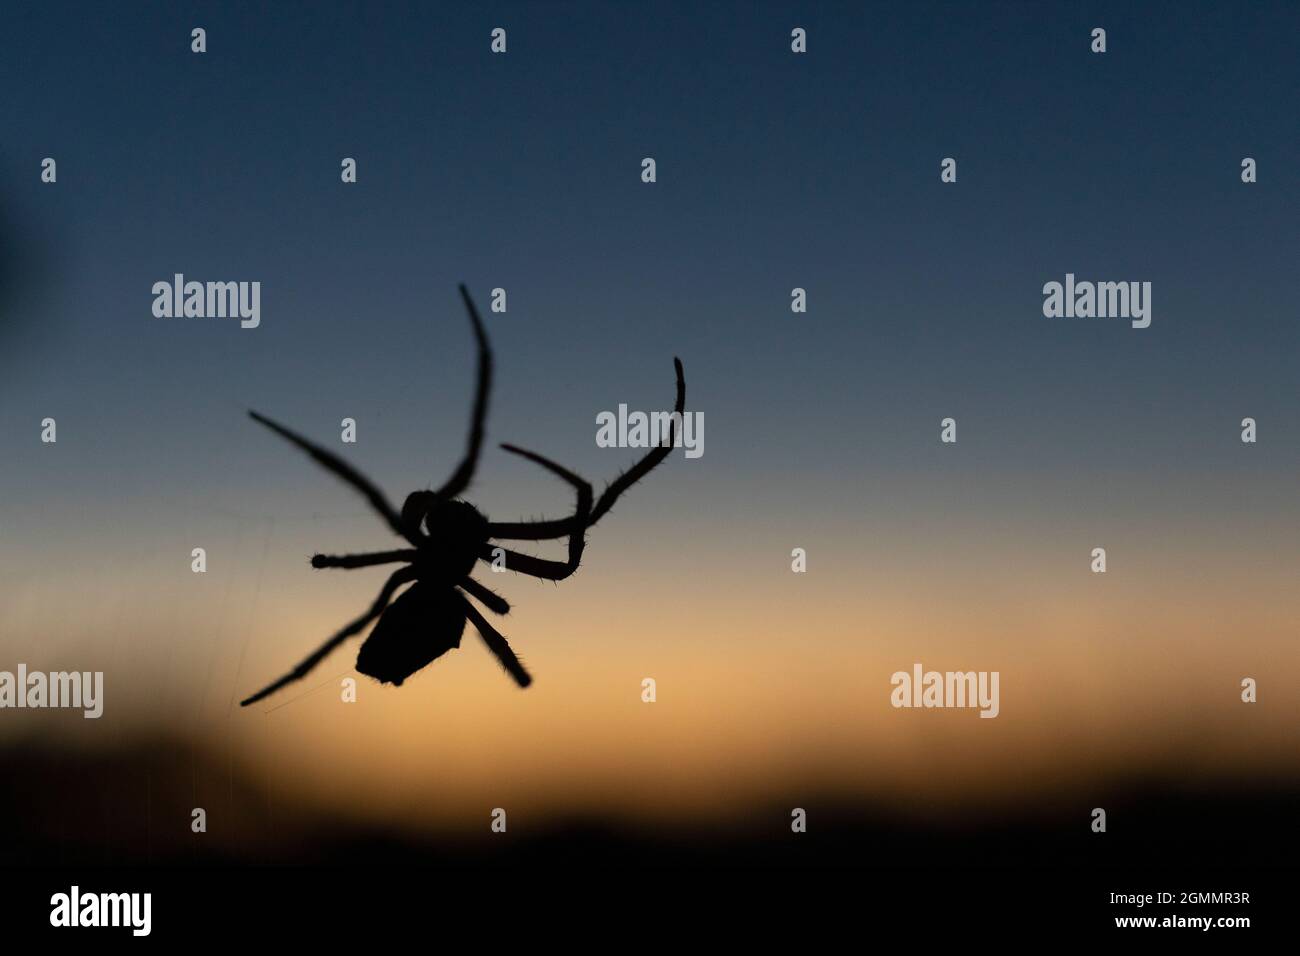 Close up silhouette spider against dusk sky Stock Photo